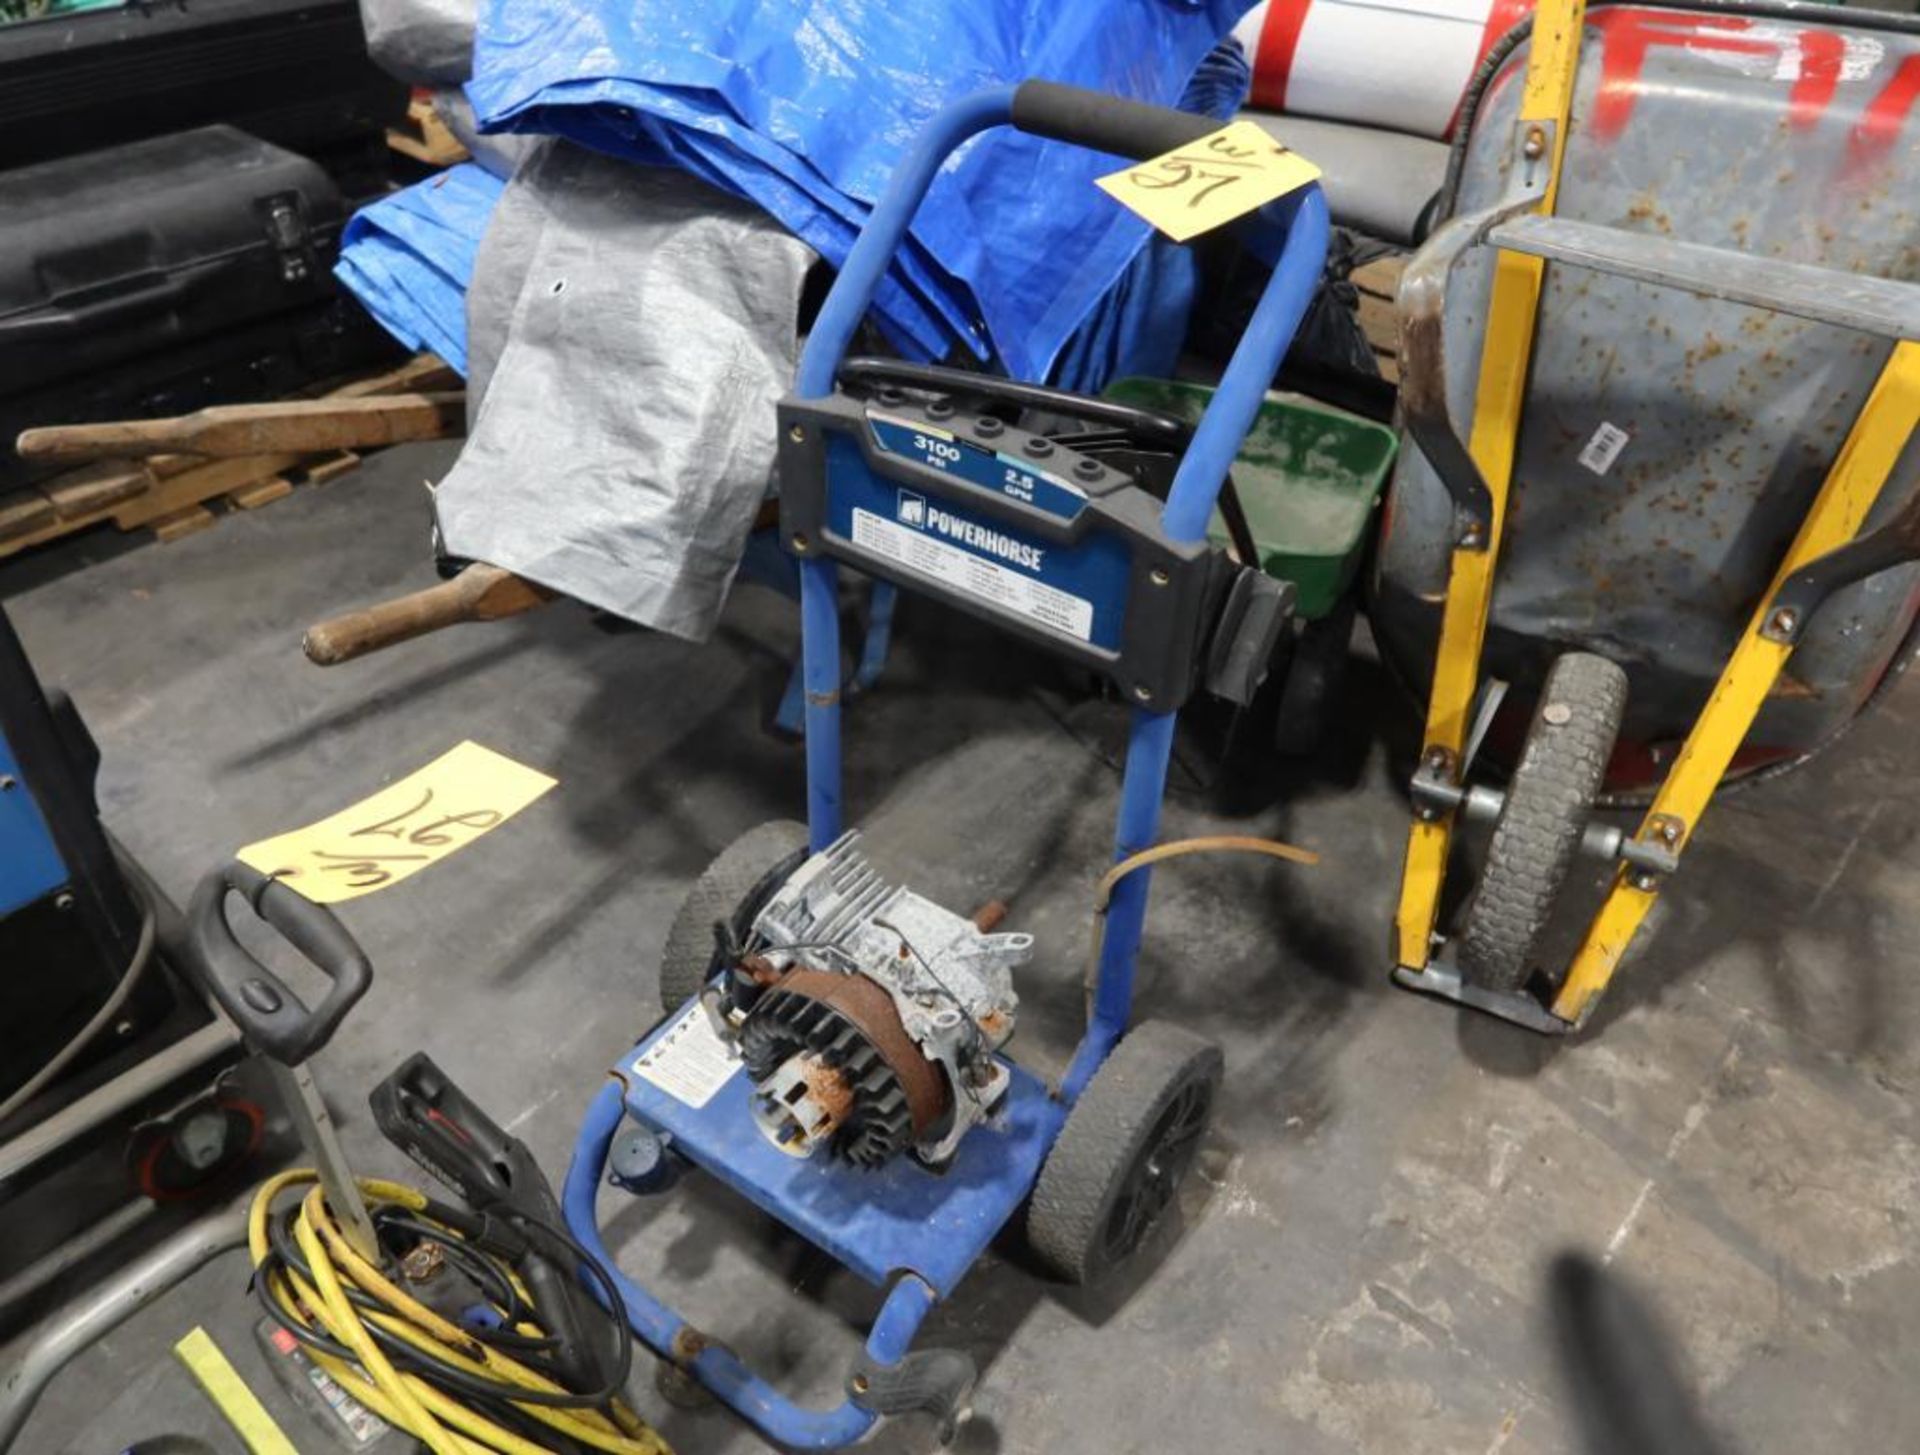 LOT: Ryobi 2000 PSI Electric Pressure Washer, Powerhorse 3100 Pressure Washer (Parts Only) - Image 3 of 5